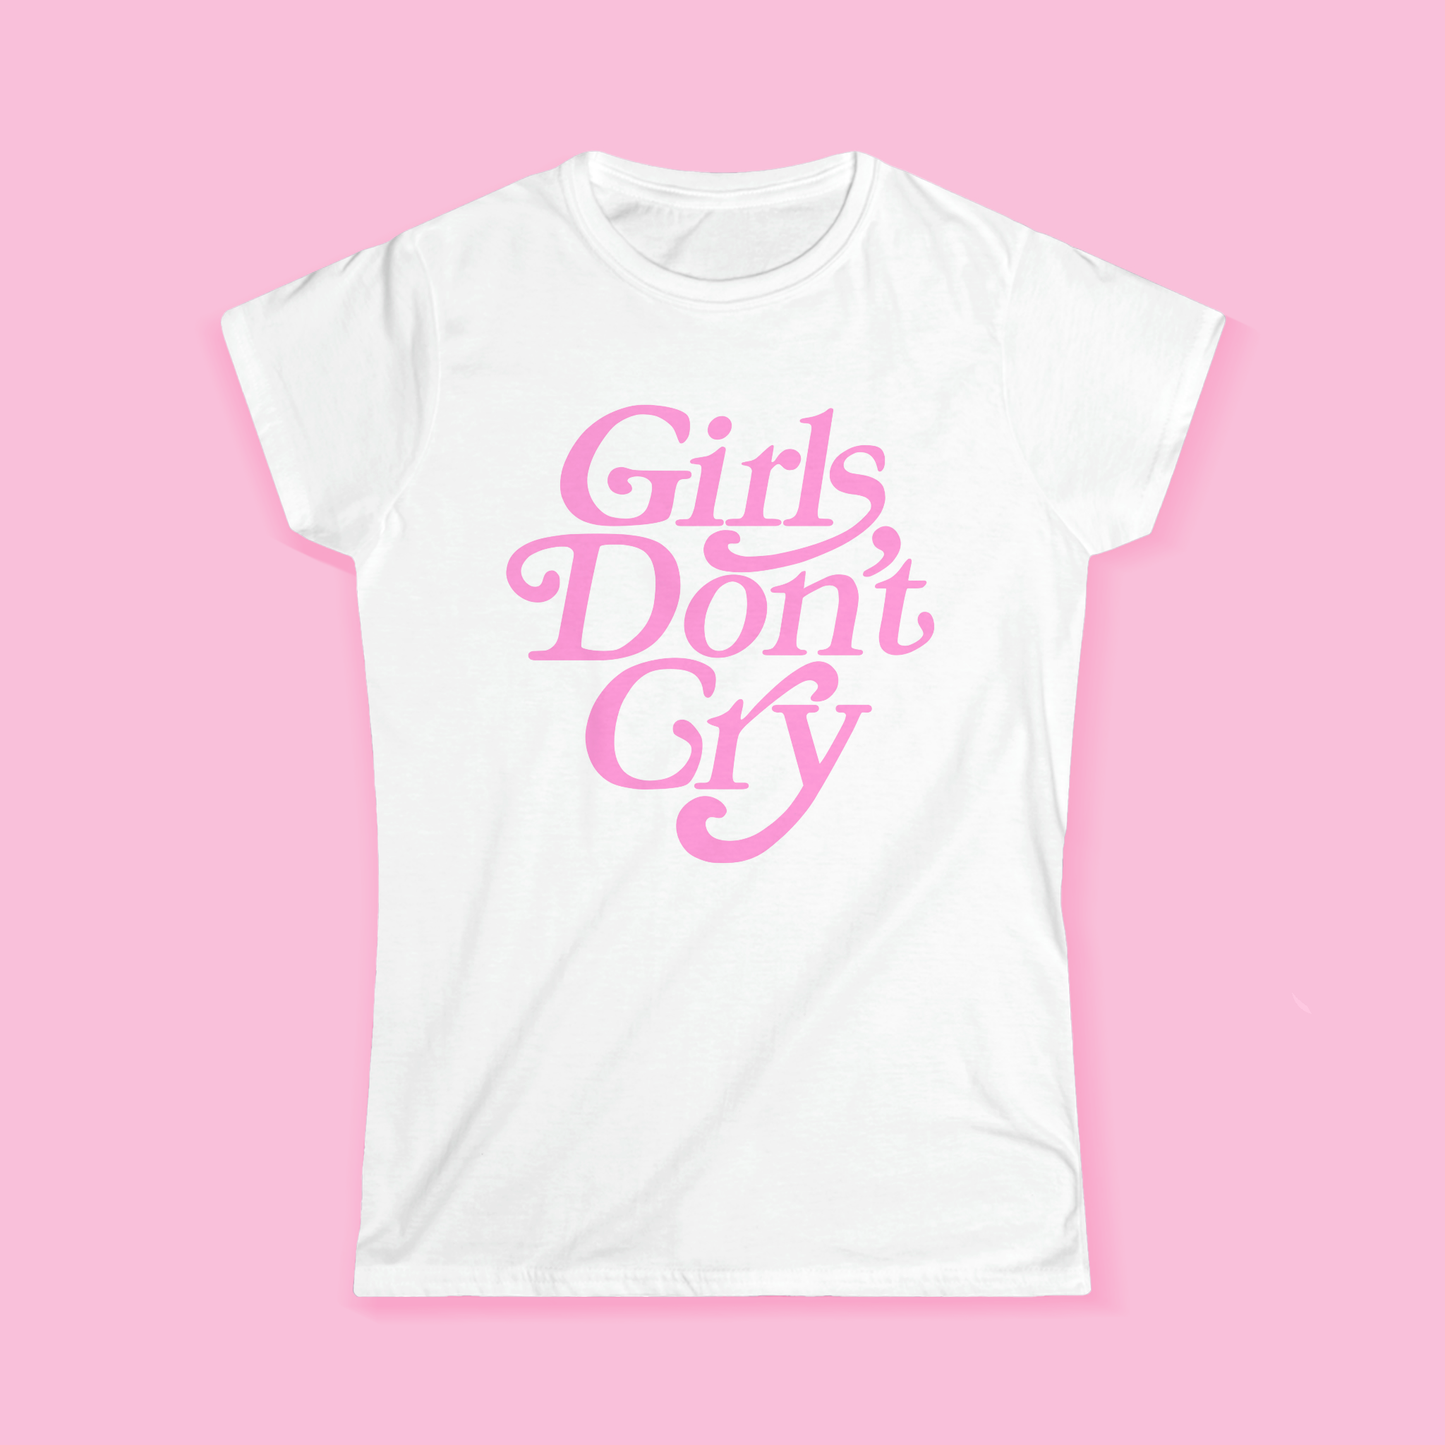 Girls Don't Cry Girly T-Shirt